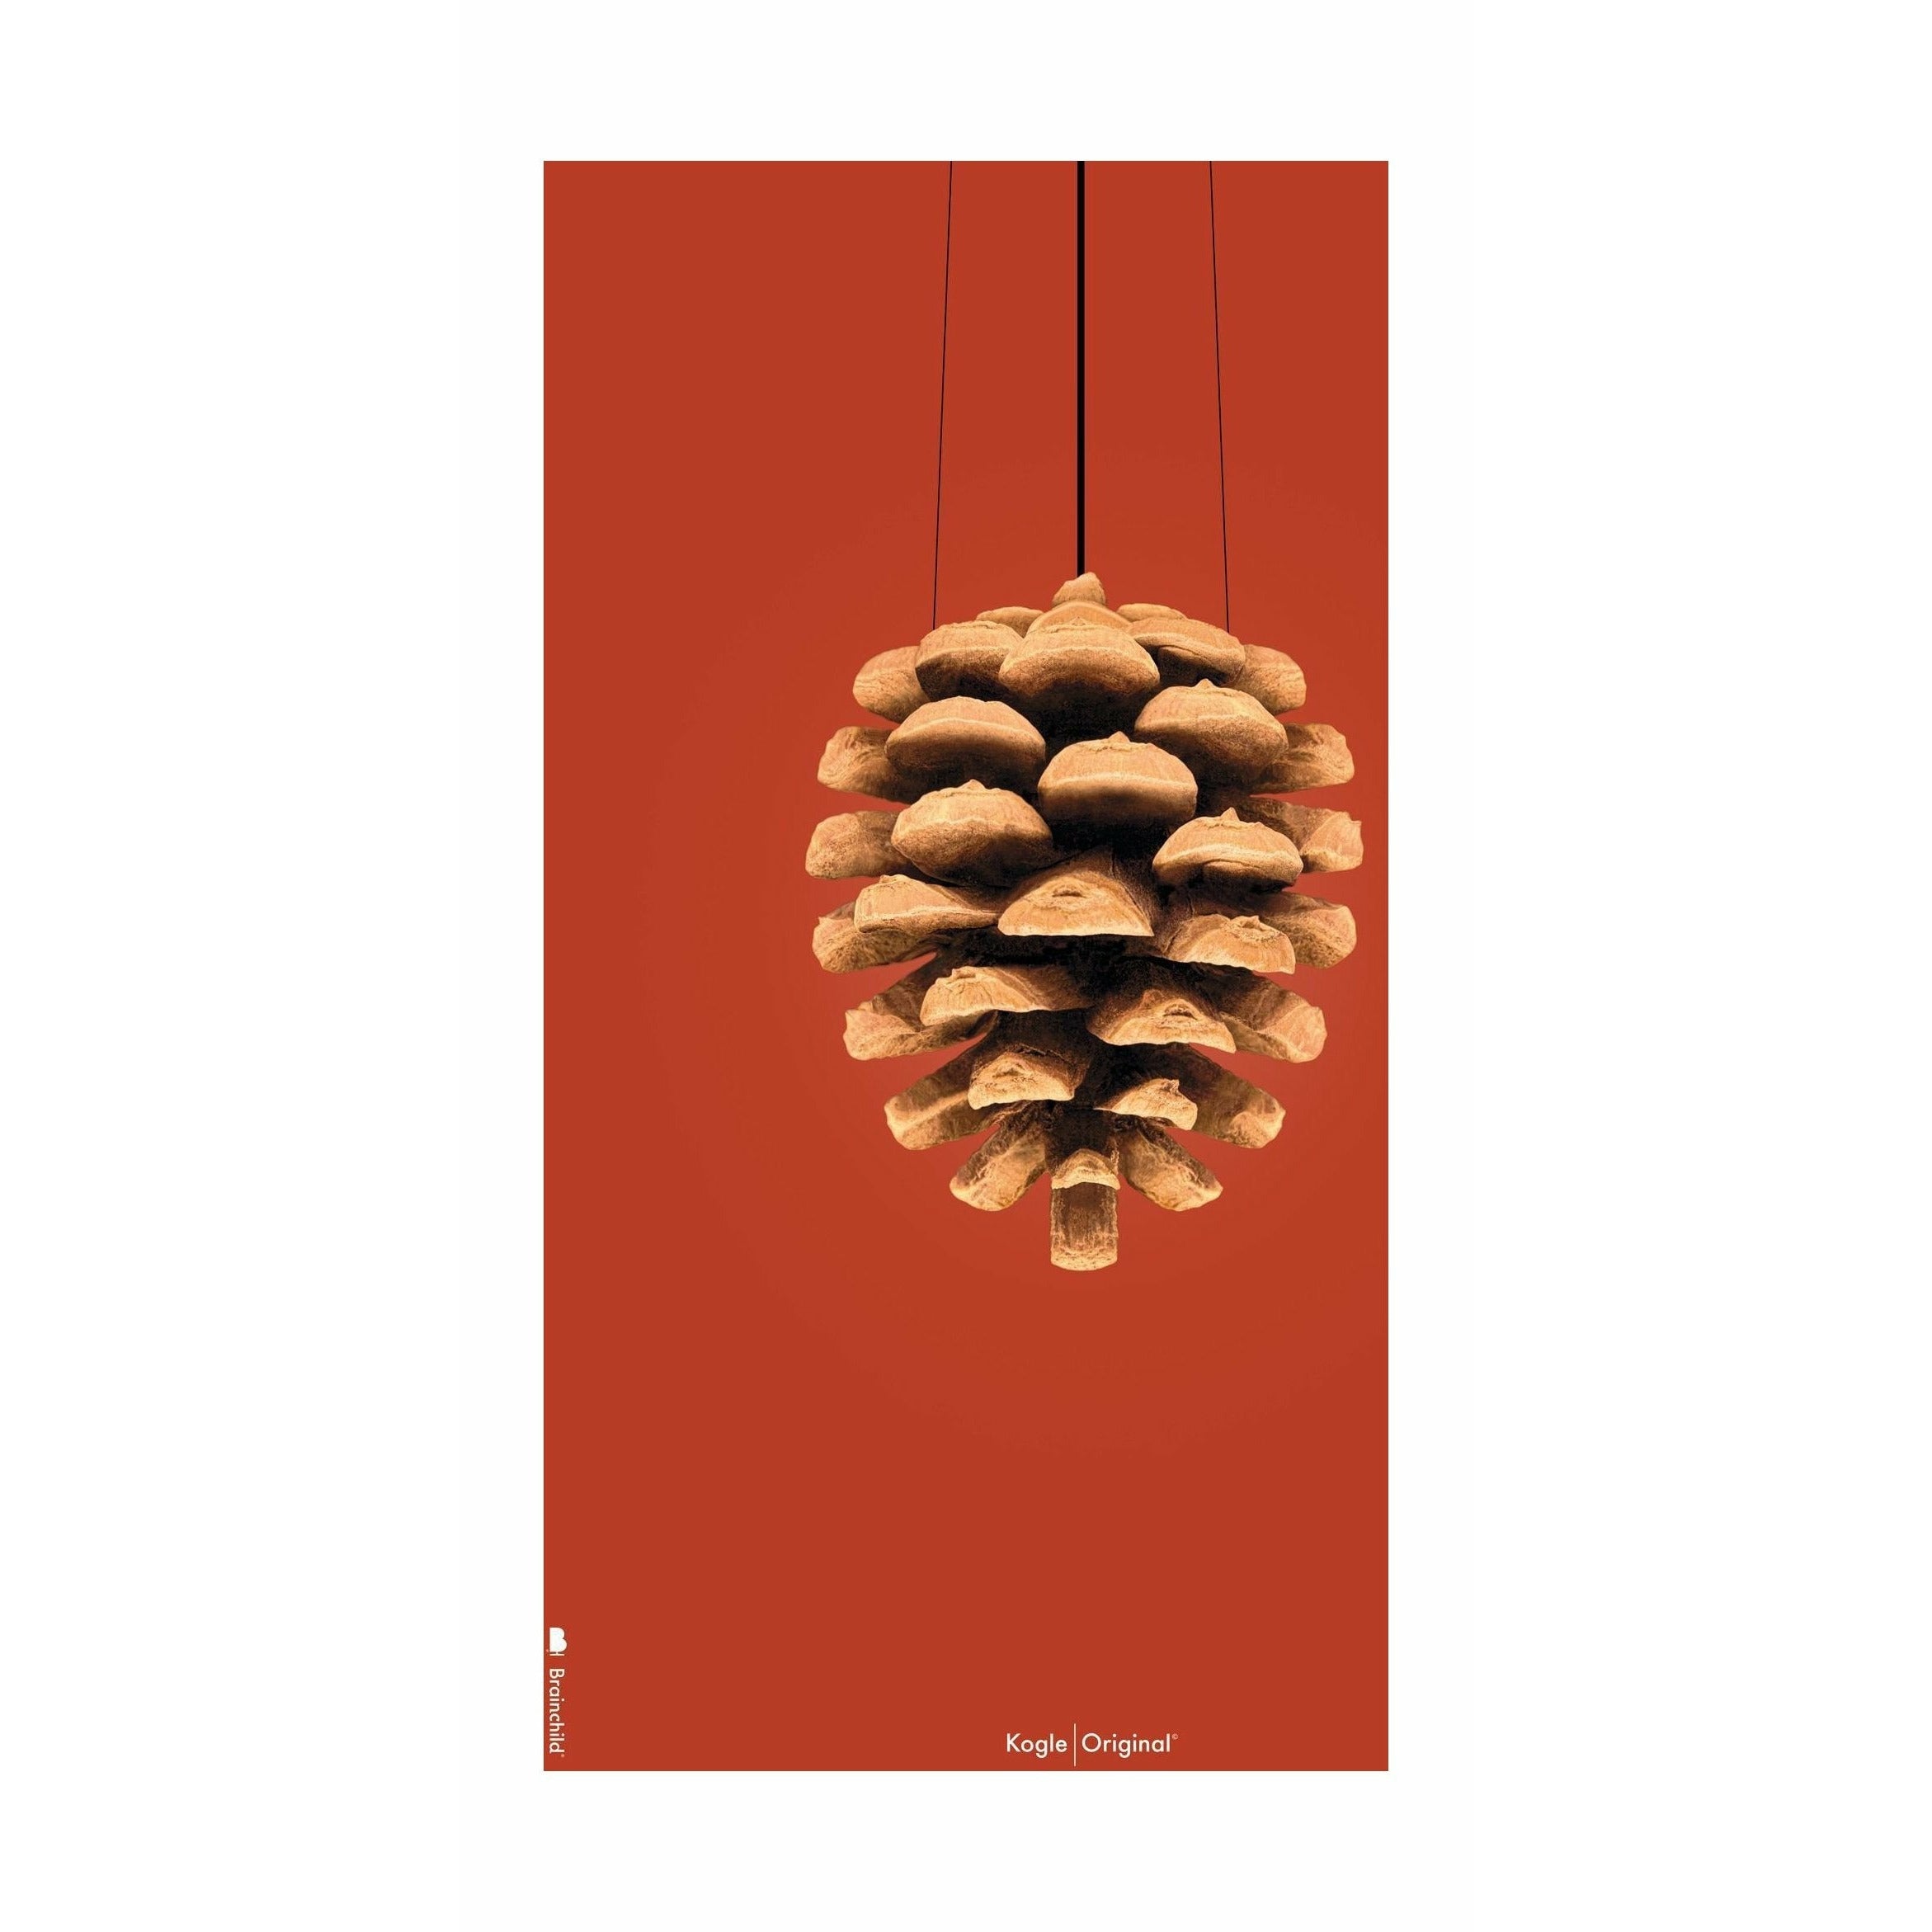 Brainchild Pine Cone Classic Poster Without Frame 30x40 Cm, Red Background